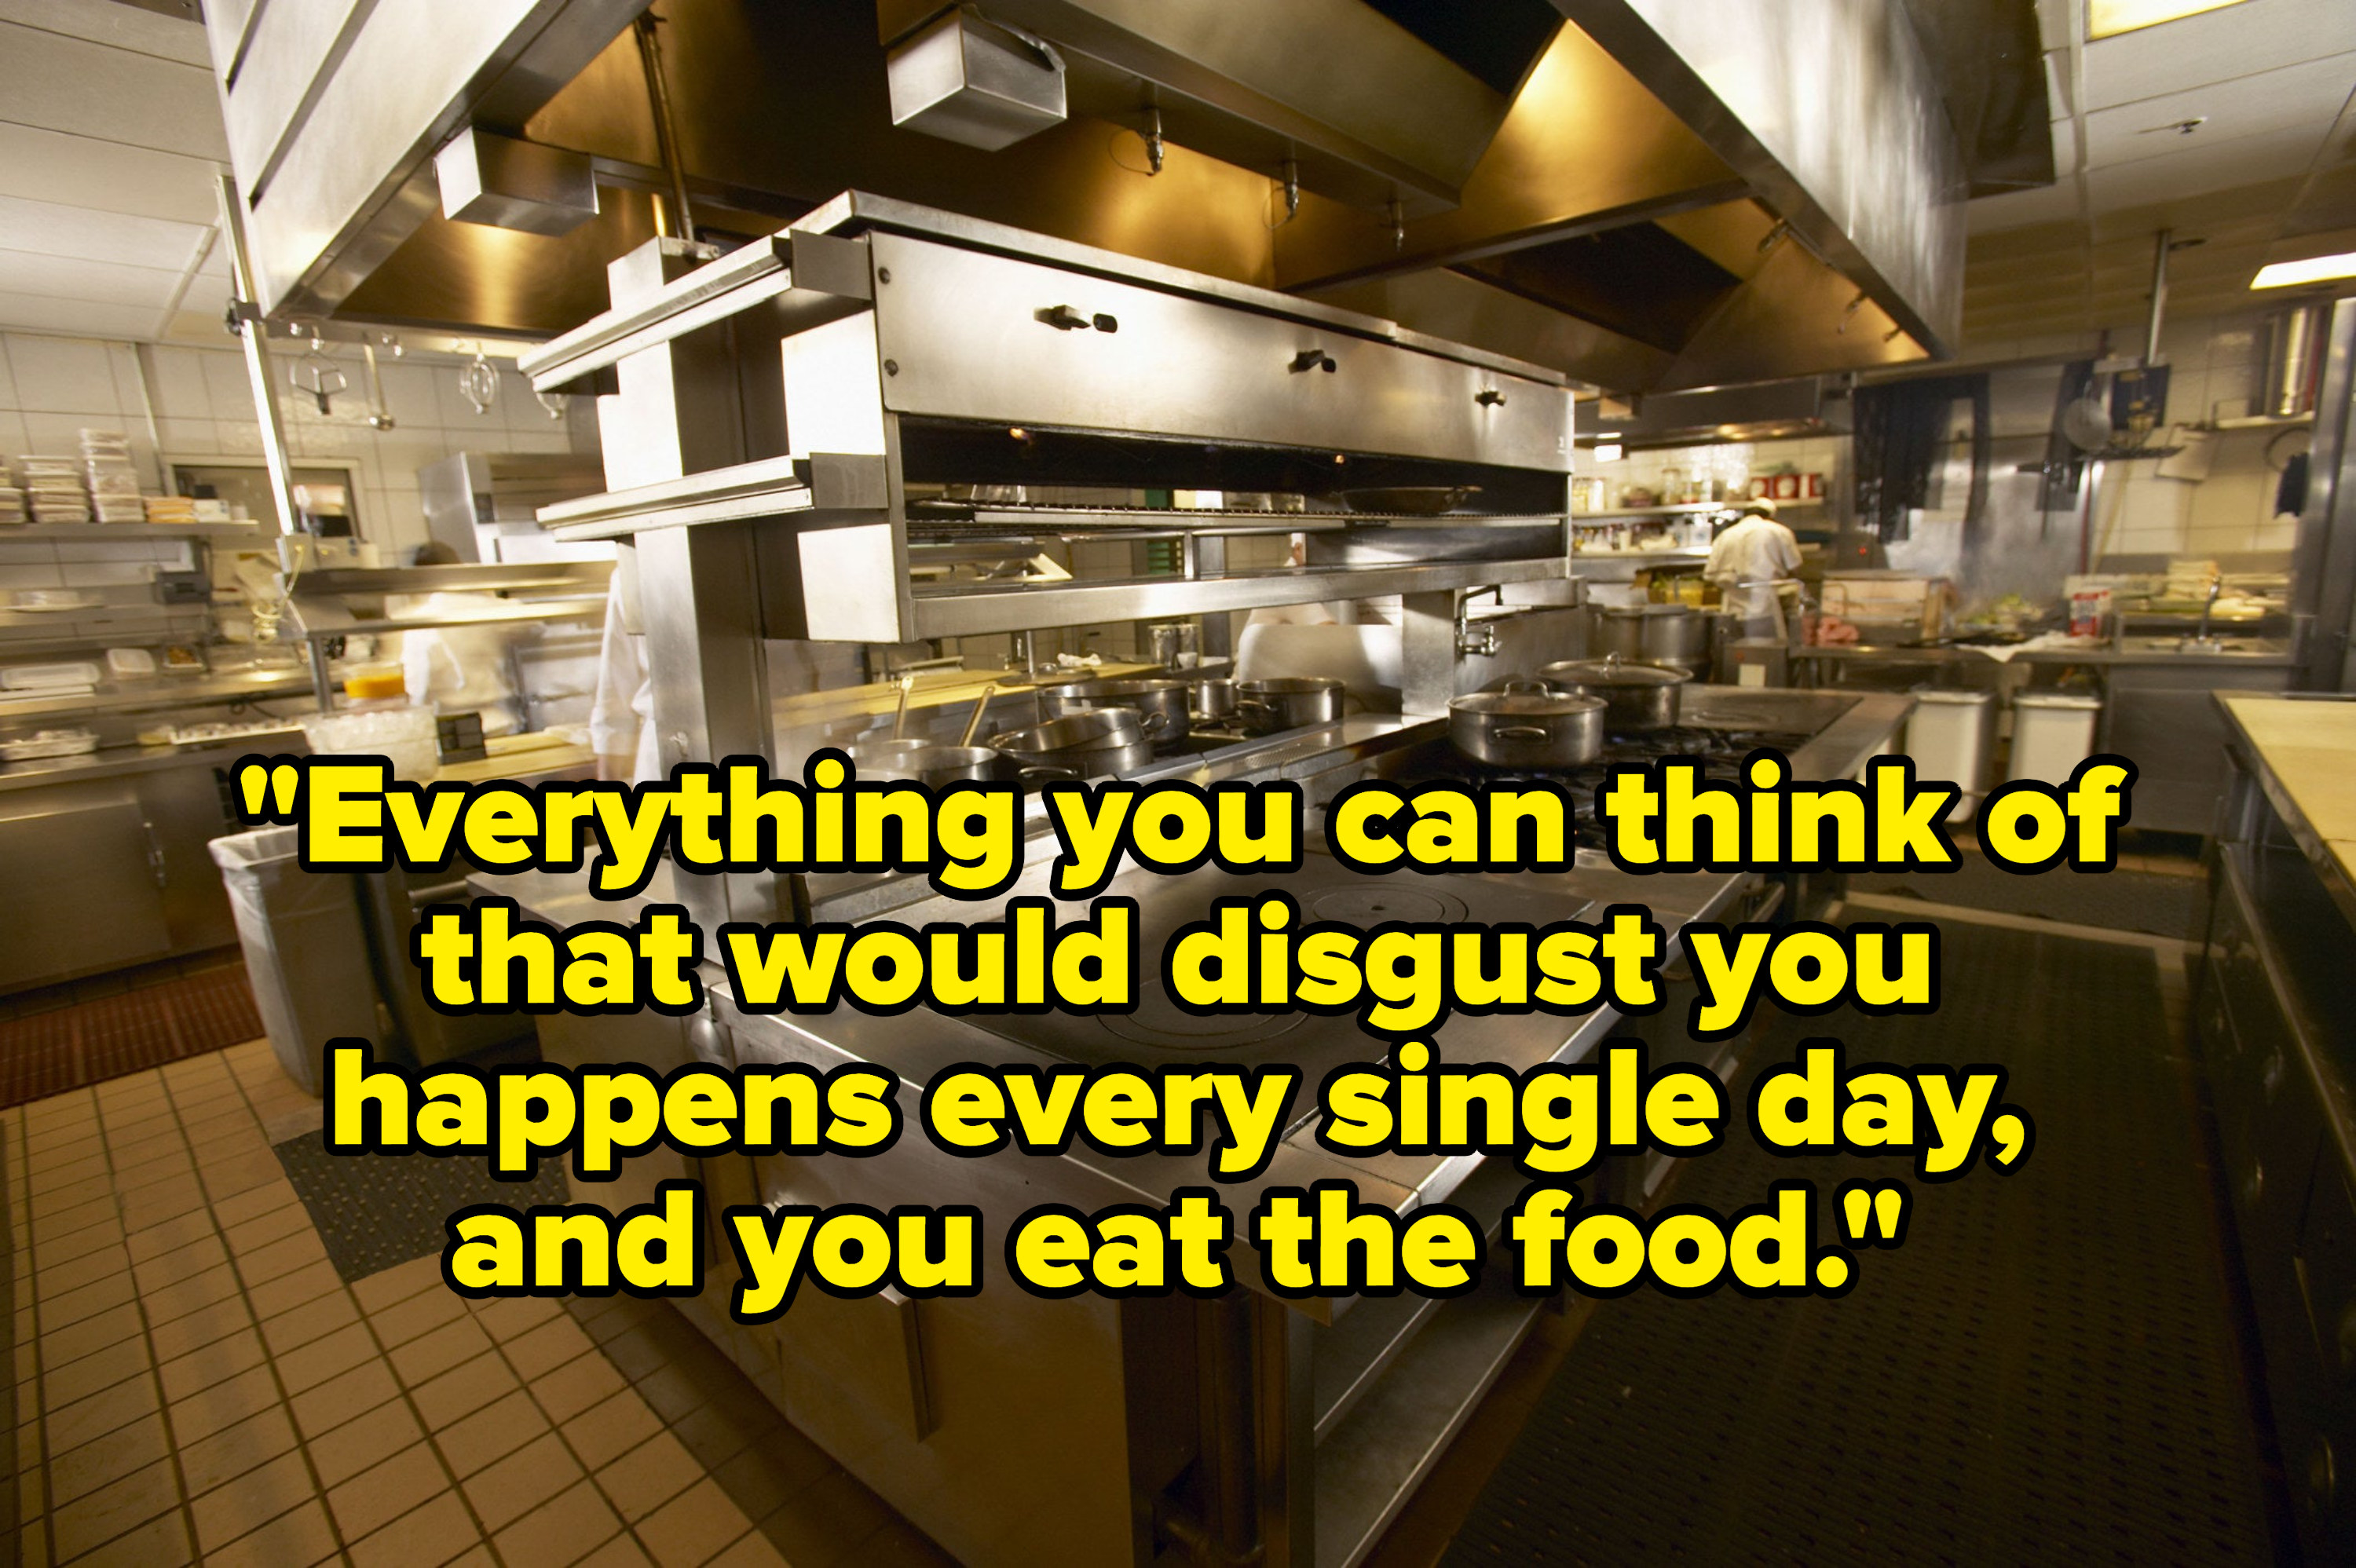 &quot;Everything you can think of that would disgust you happens every single day, and you eat the food&quot; over a restaurant kitchen